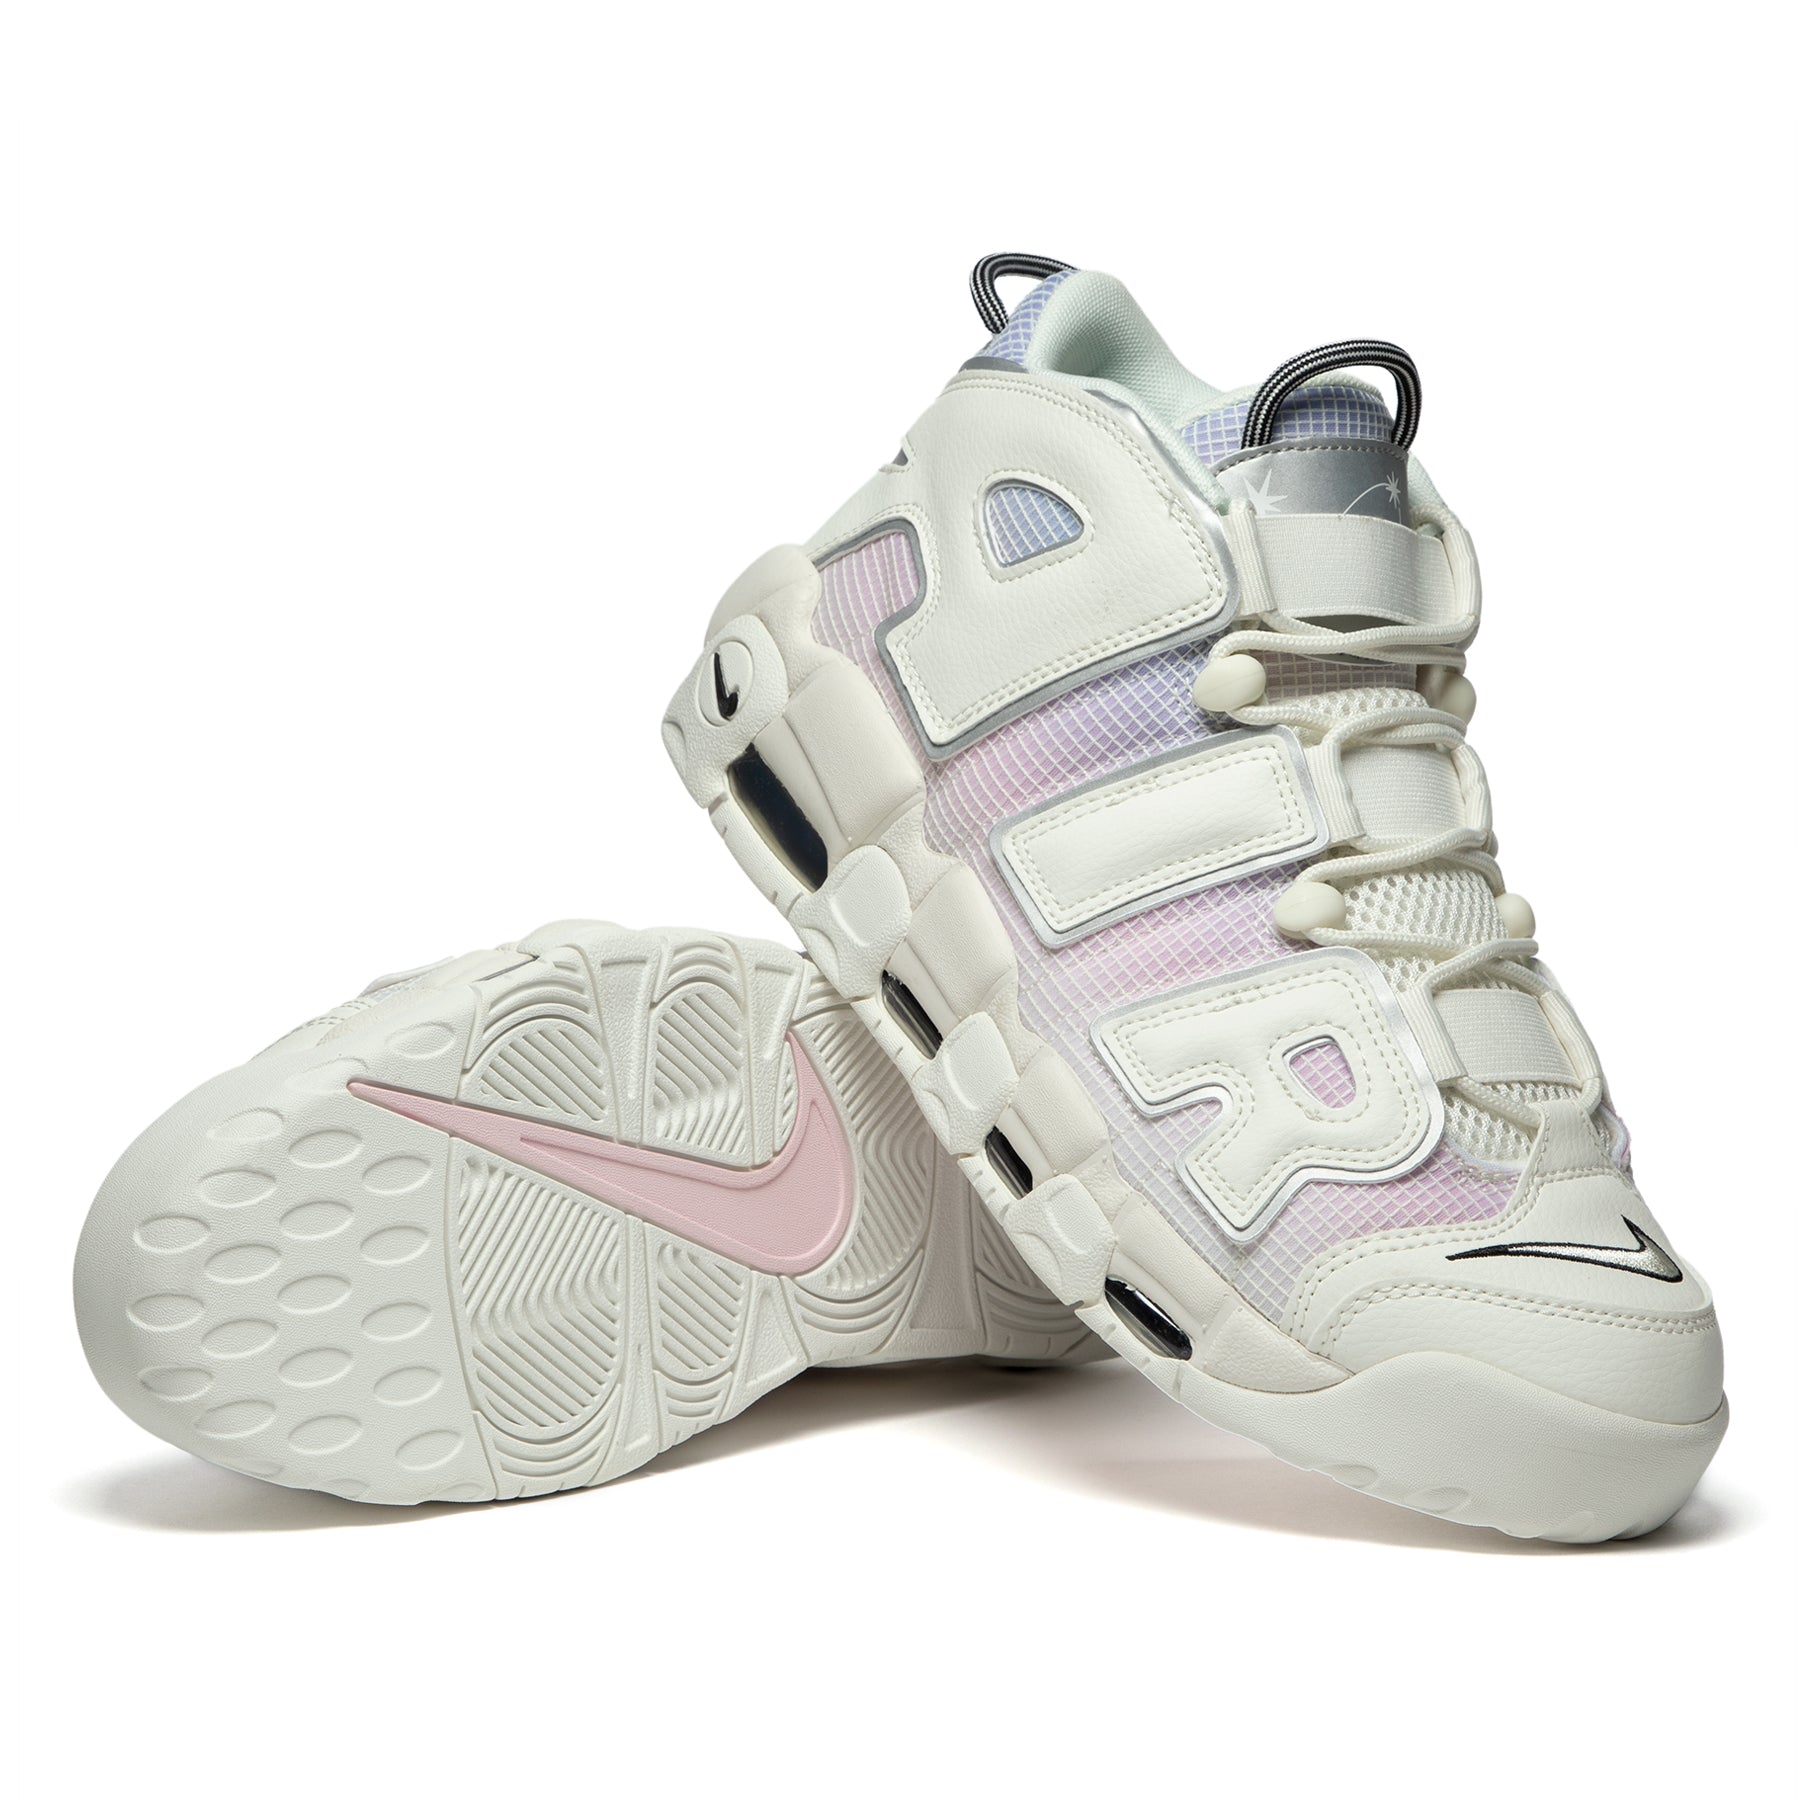 Nike Air More Uptempo '96 Thank You Wilson Sail Pink Foam White  DR9612-100 Men's